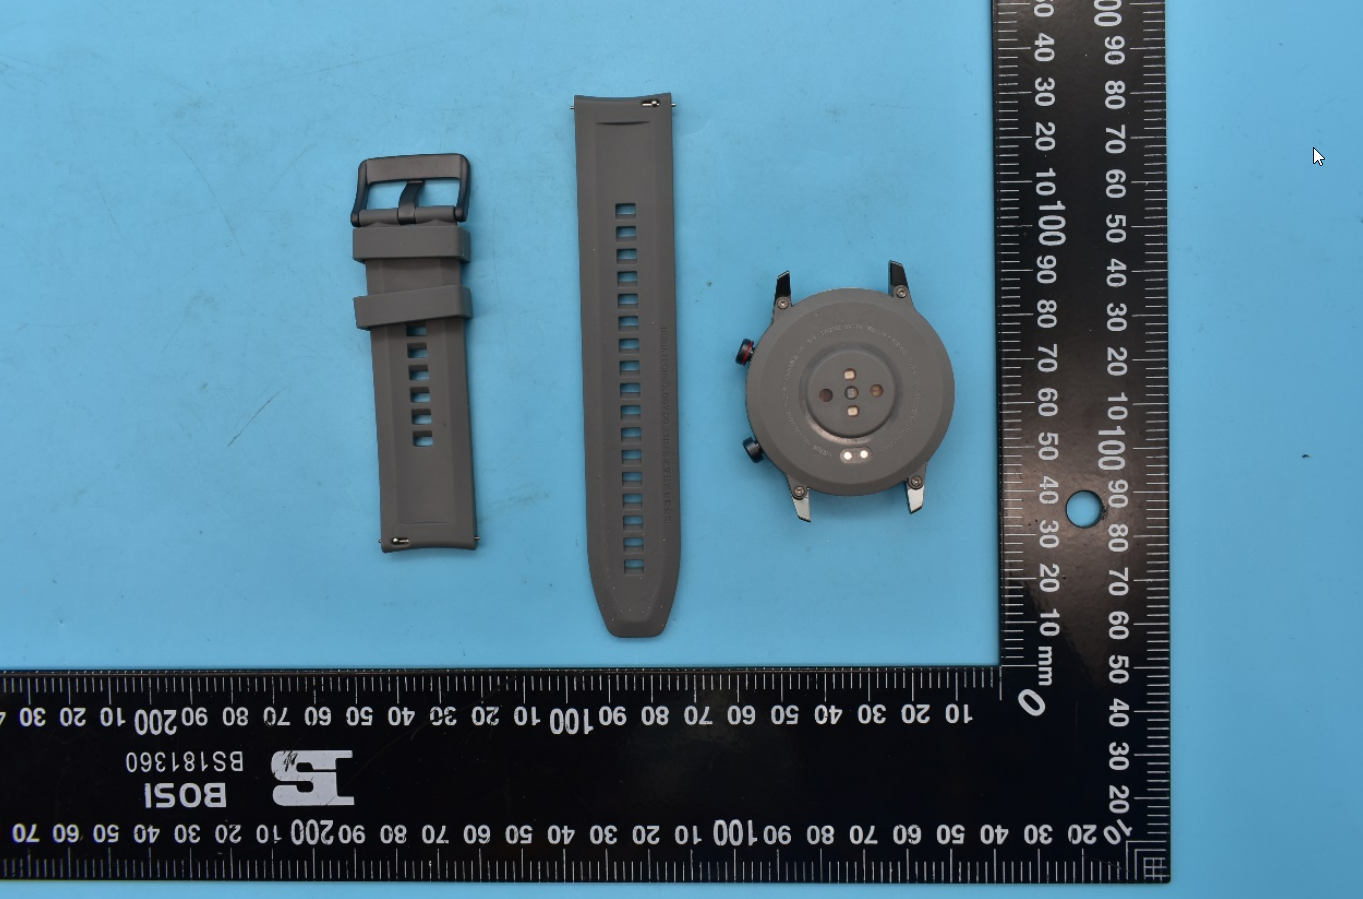 Nubia Red Magic Watch spotted in an FCC filing